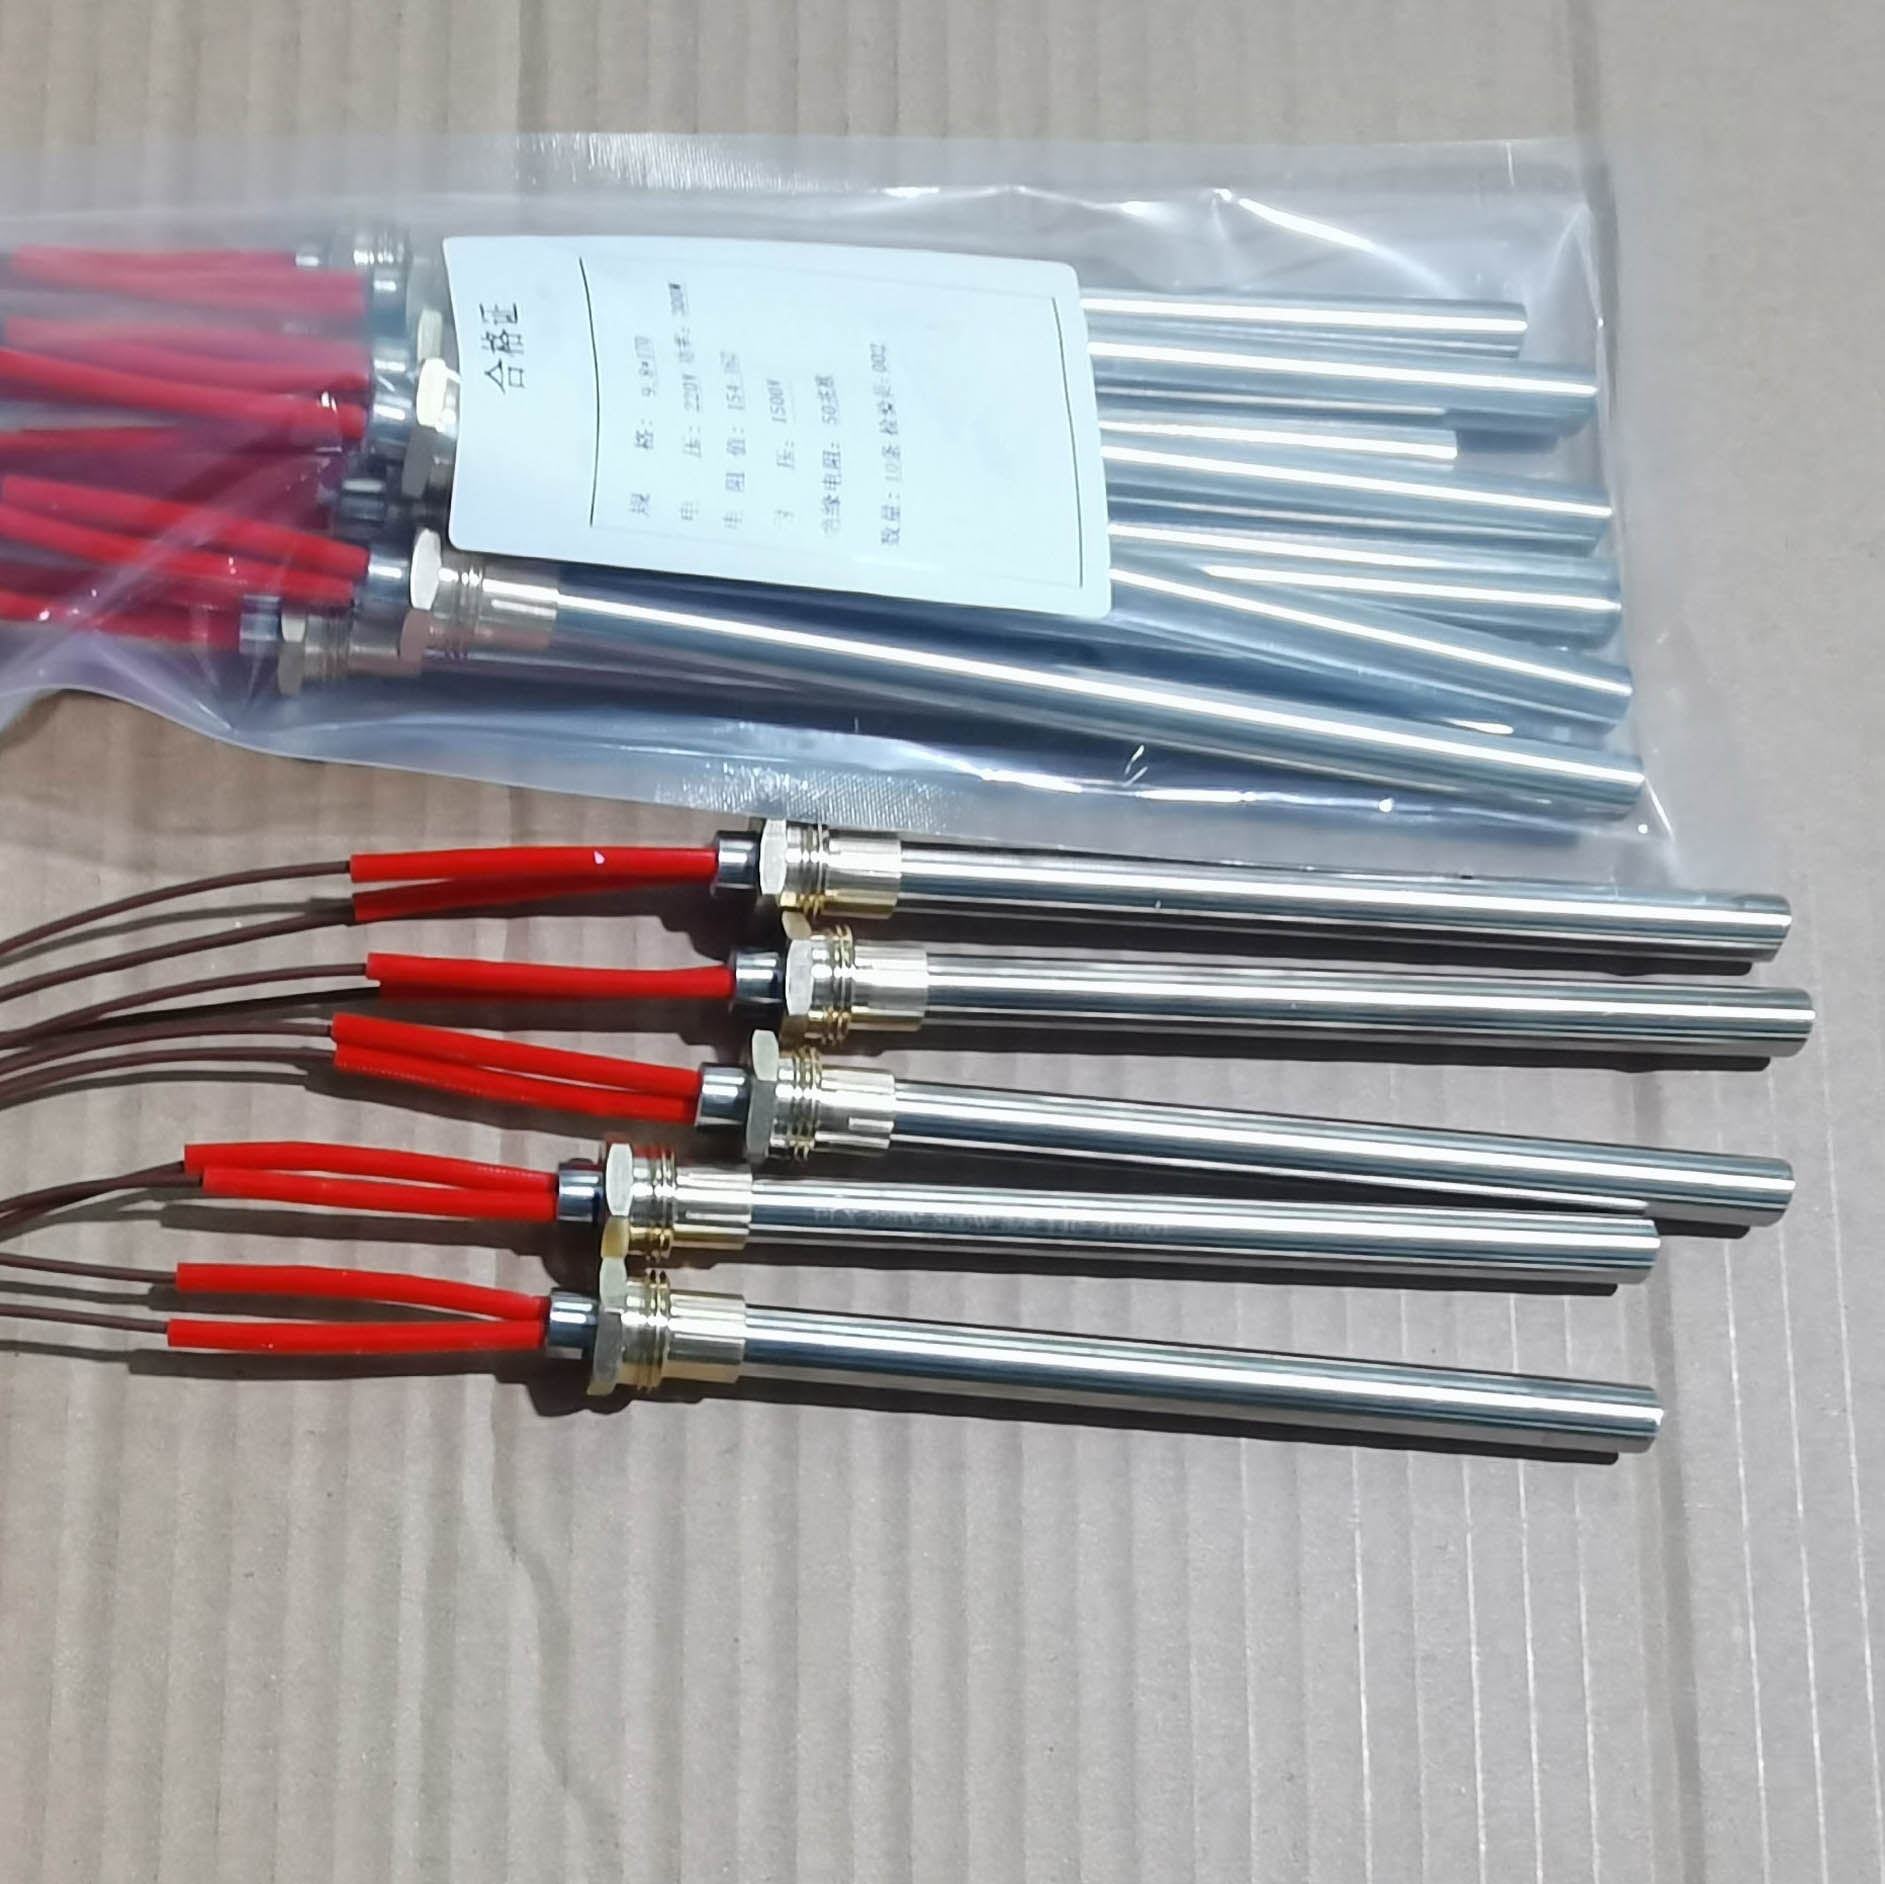 230V 280W/300W Pellet Stove Igniter / Spark Plug with 3/8G Brass Fitting